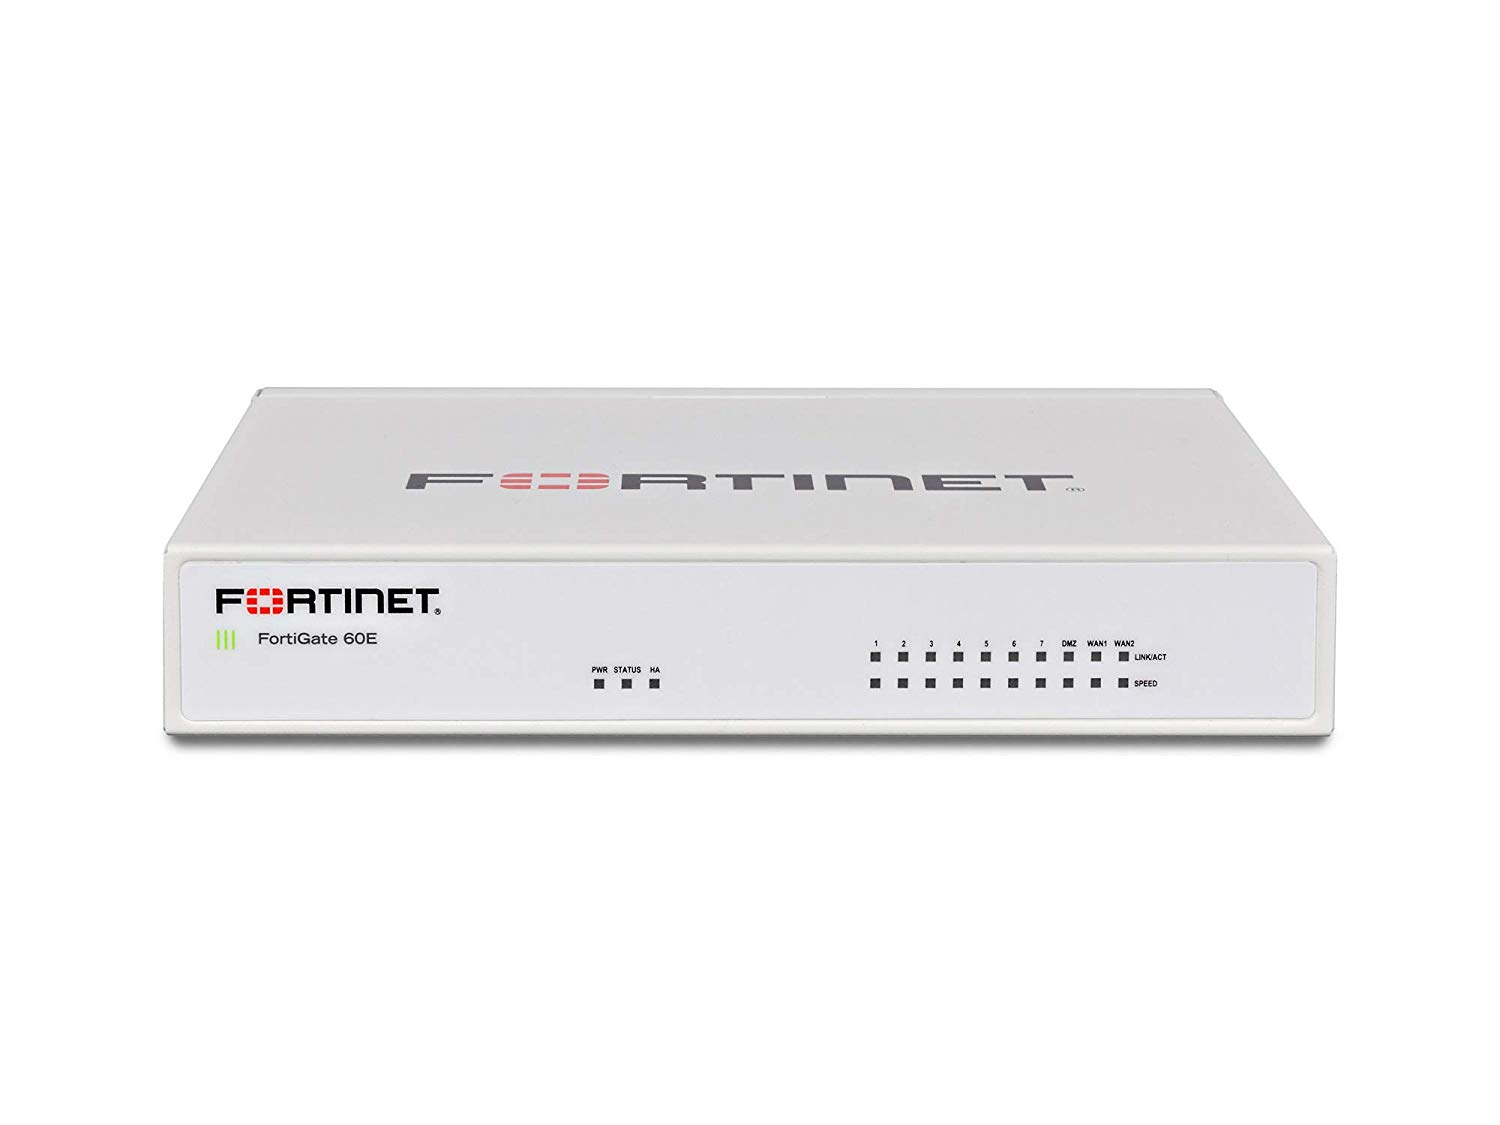 conect fortinet firewall